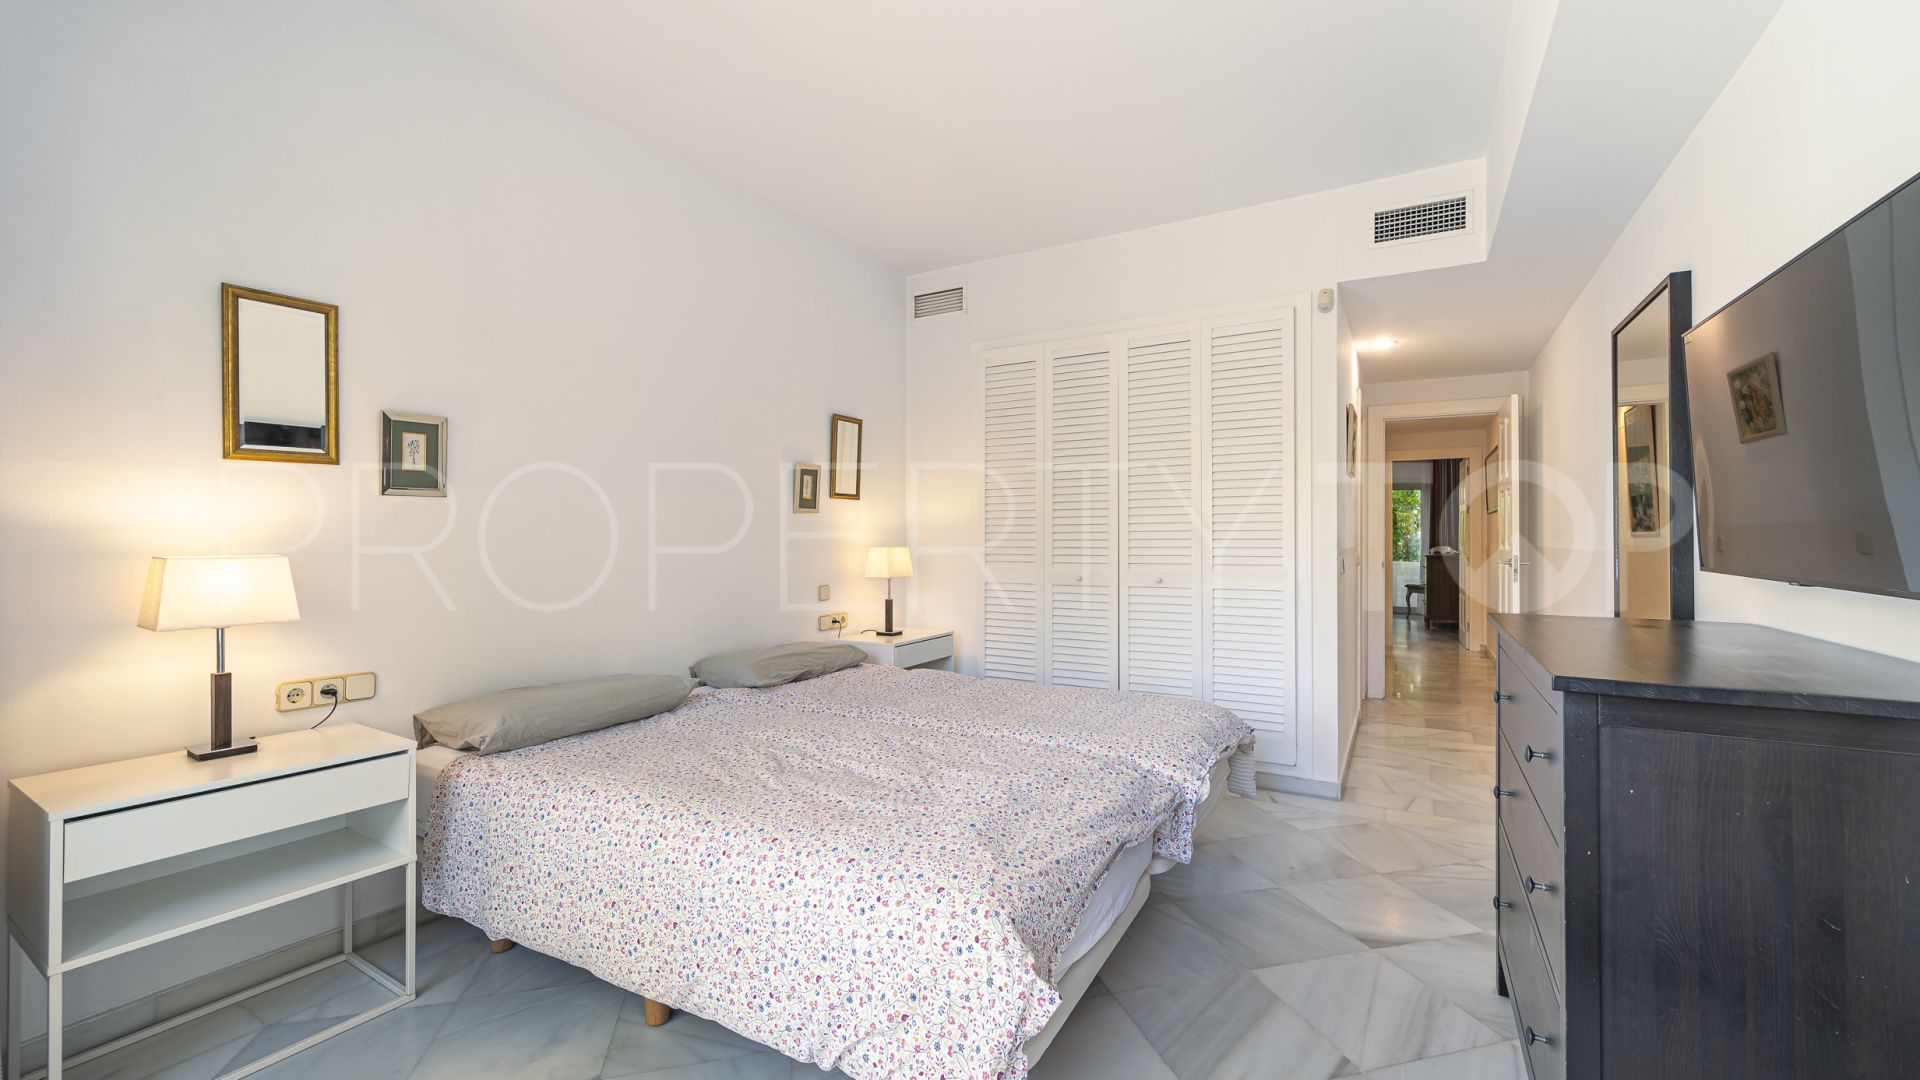 Alhambra del Mar 2 bedrooms ground floor apartment for sale